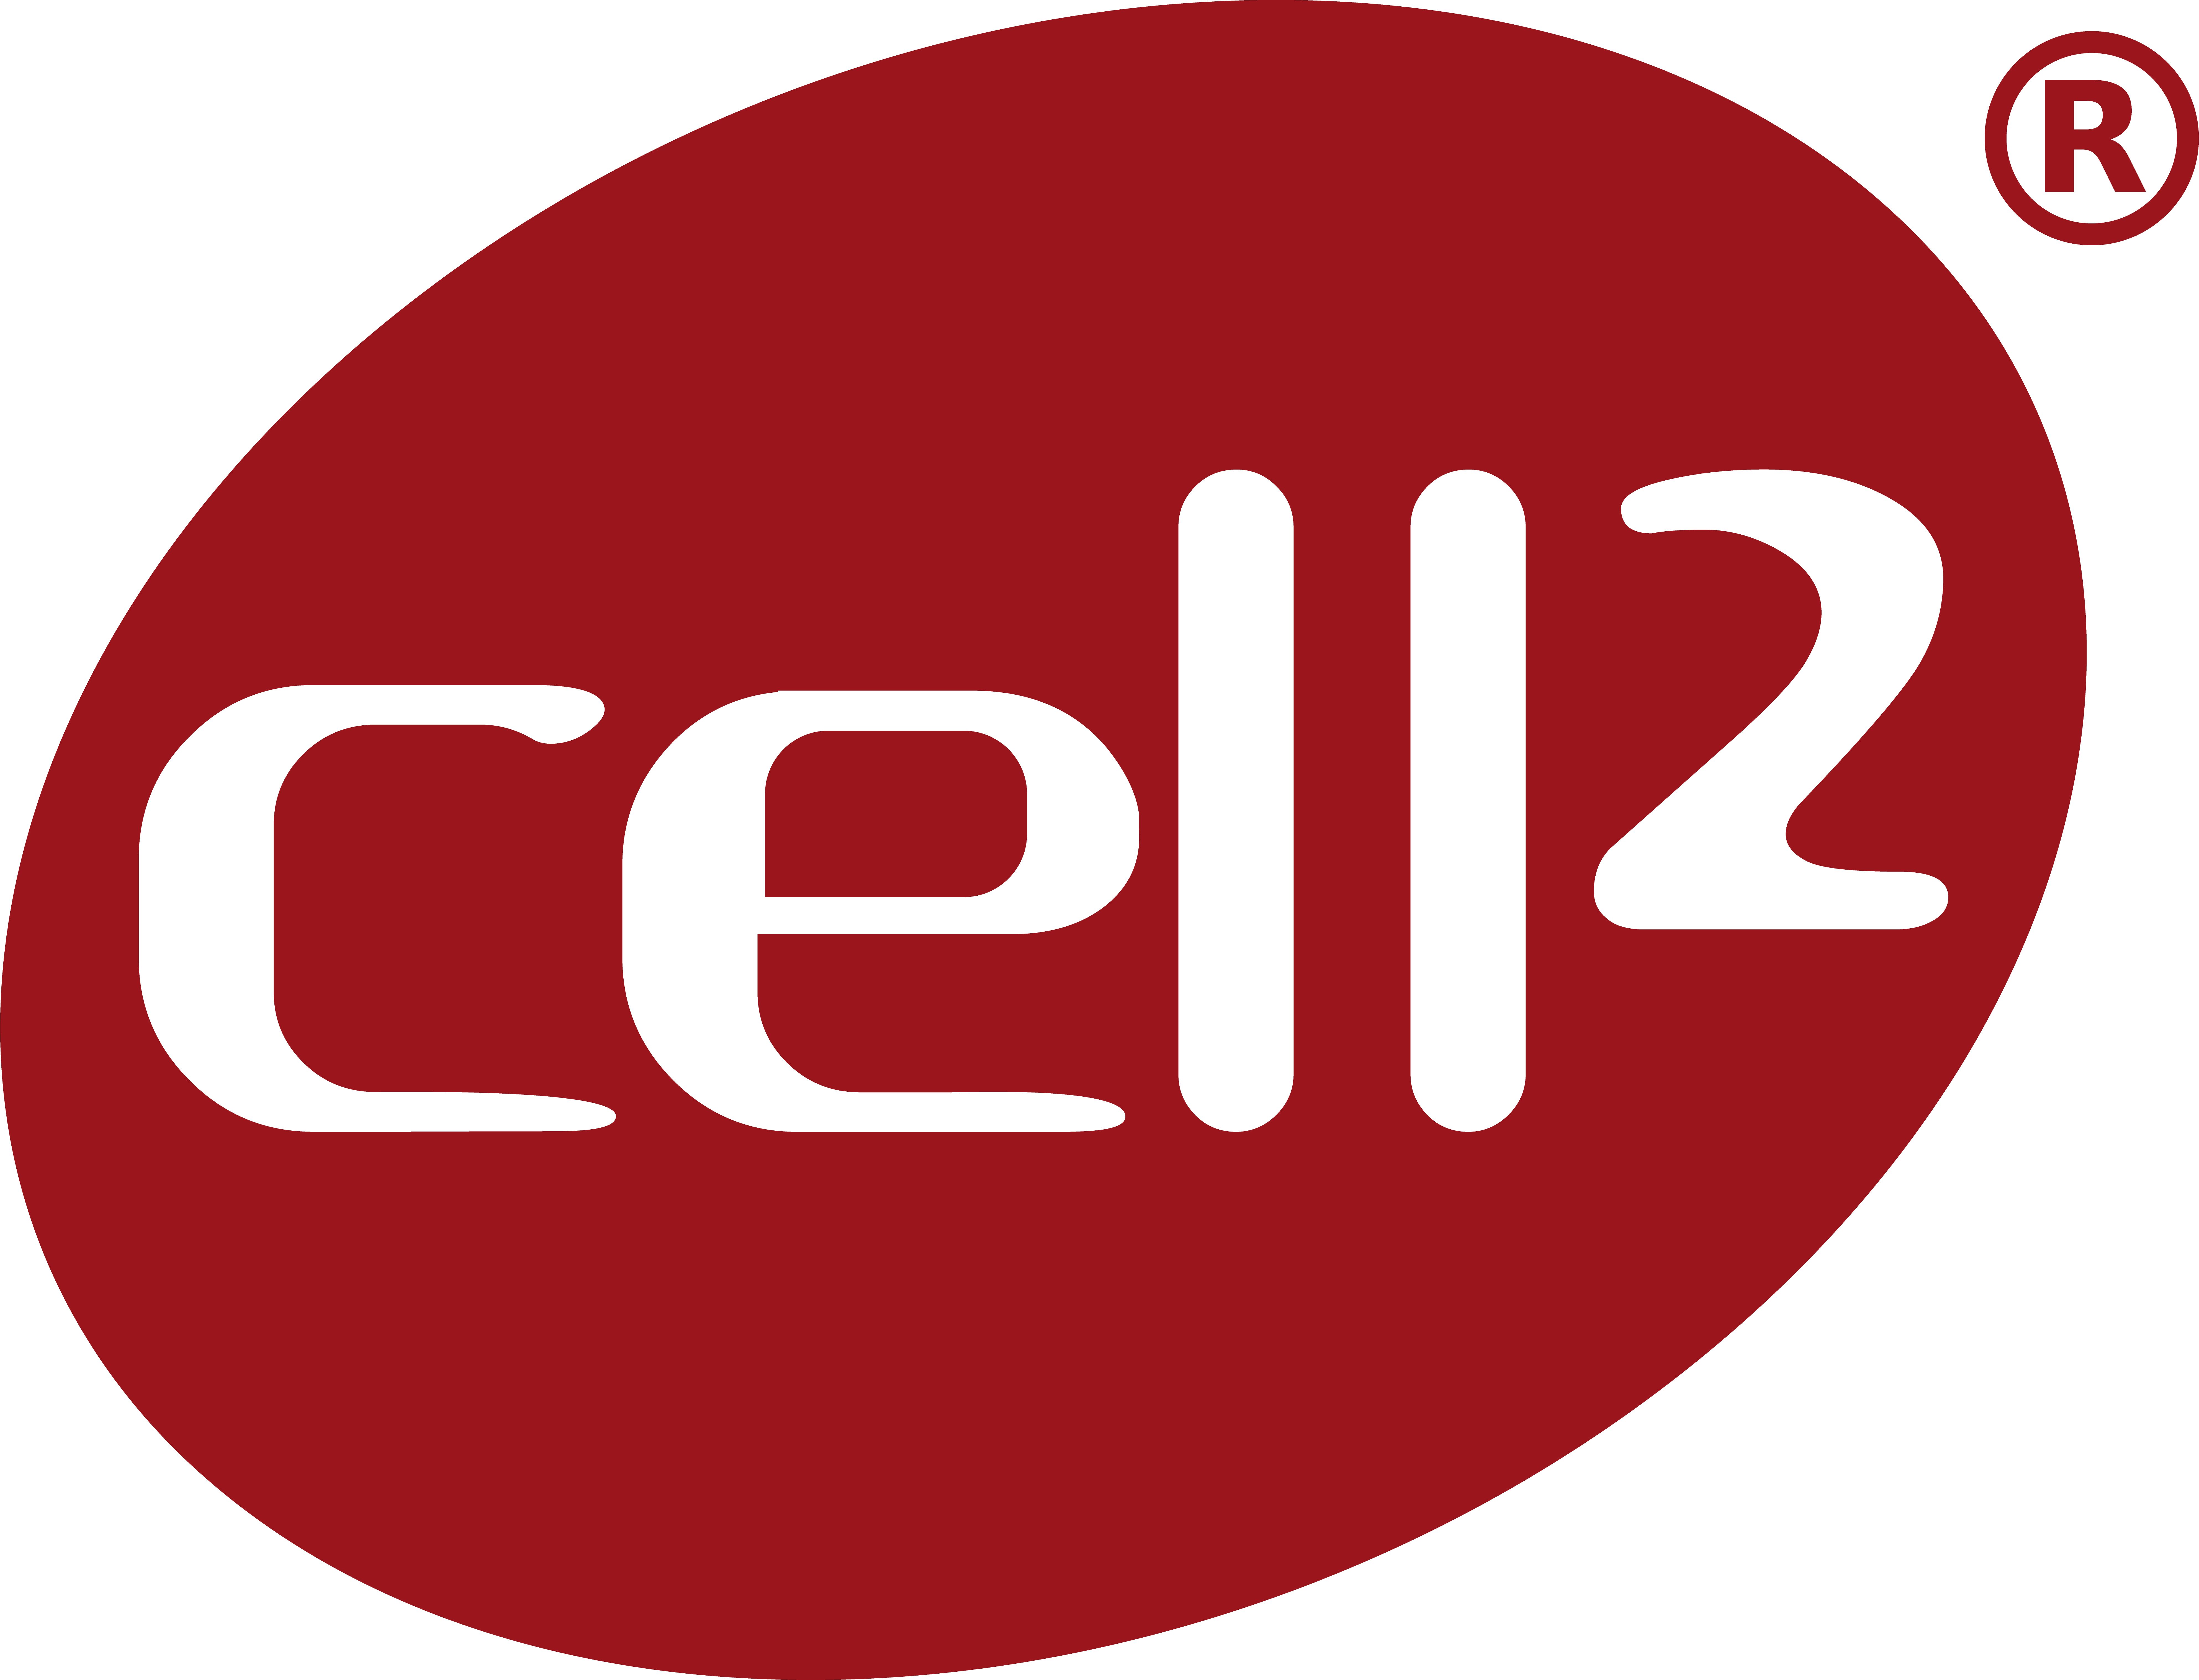 Cell2